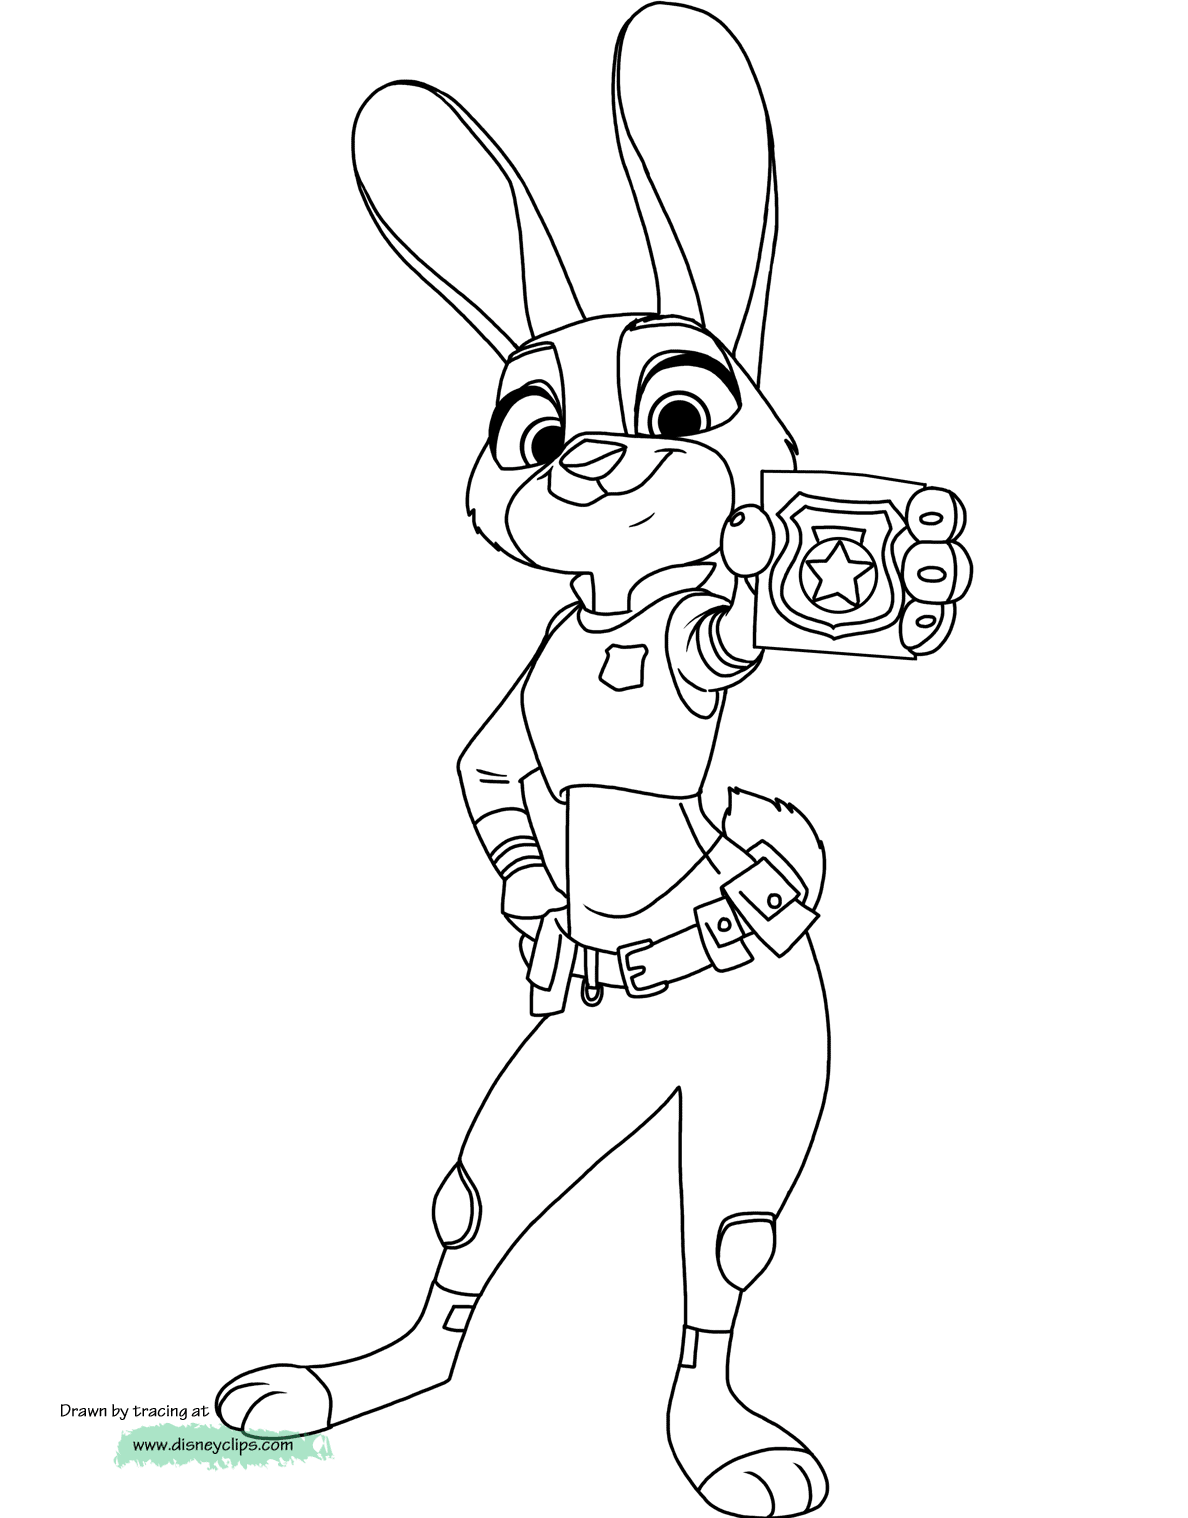 Zootopia Coloring Pages | Disneyclips.com